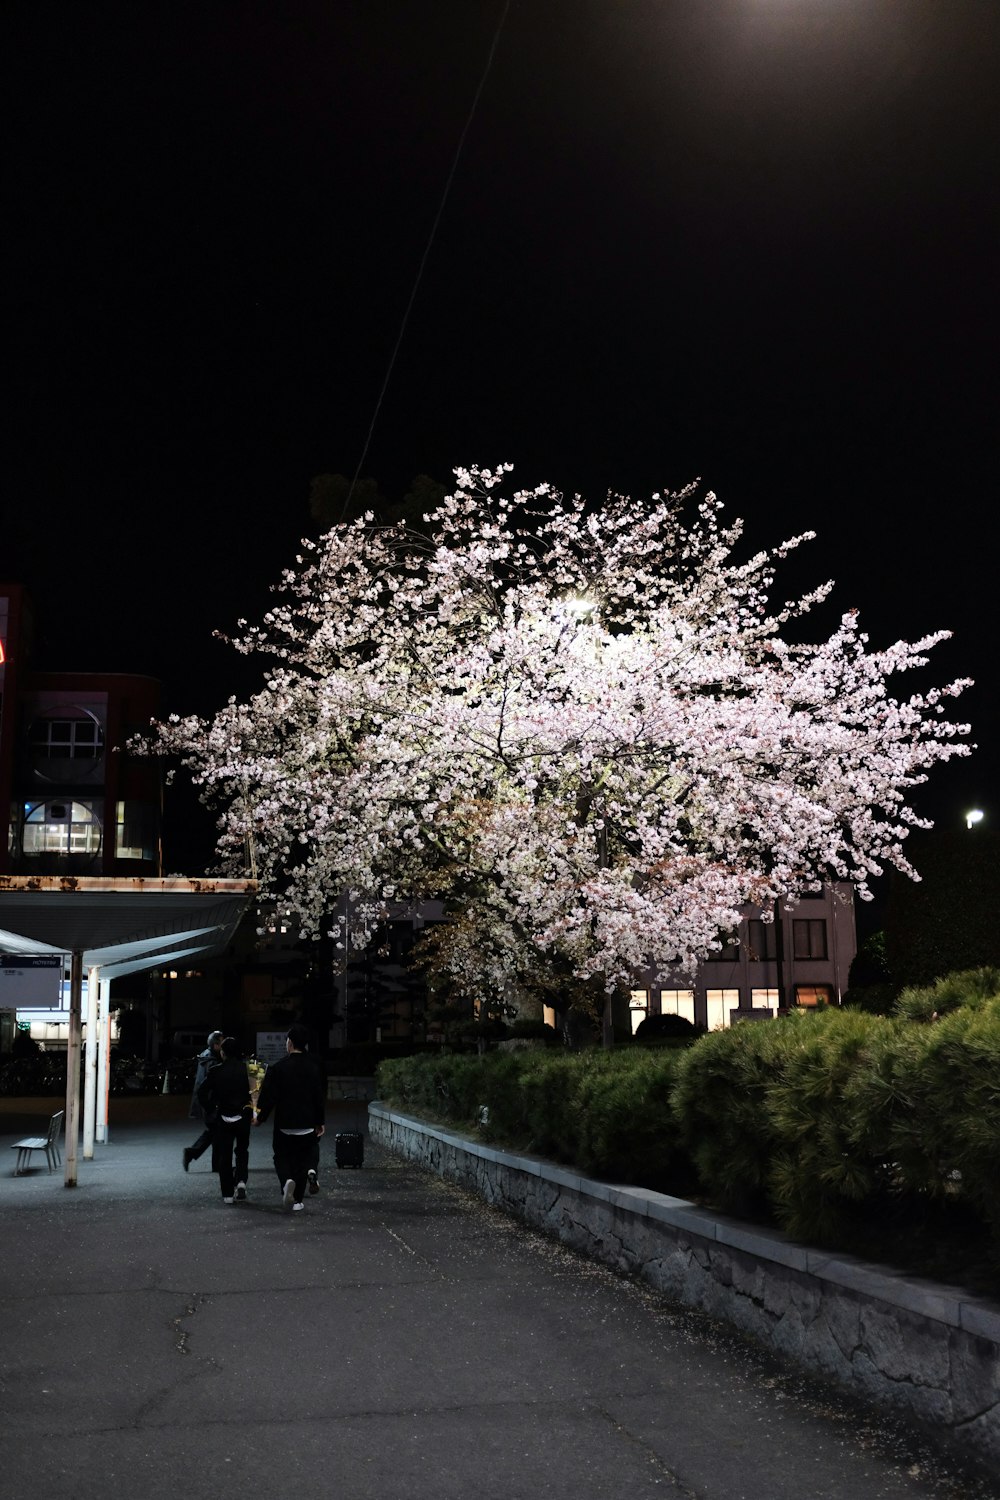 people walking on sidewalk near white cherry blossom tree during night time